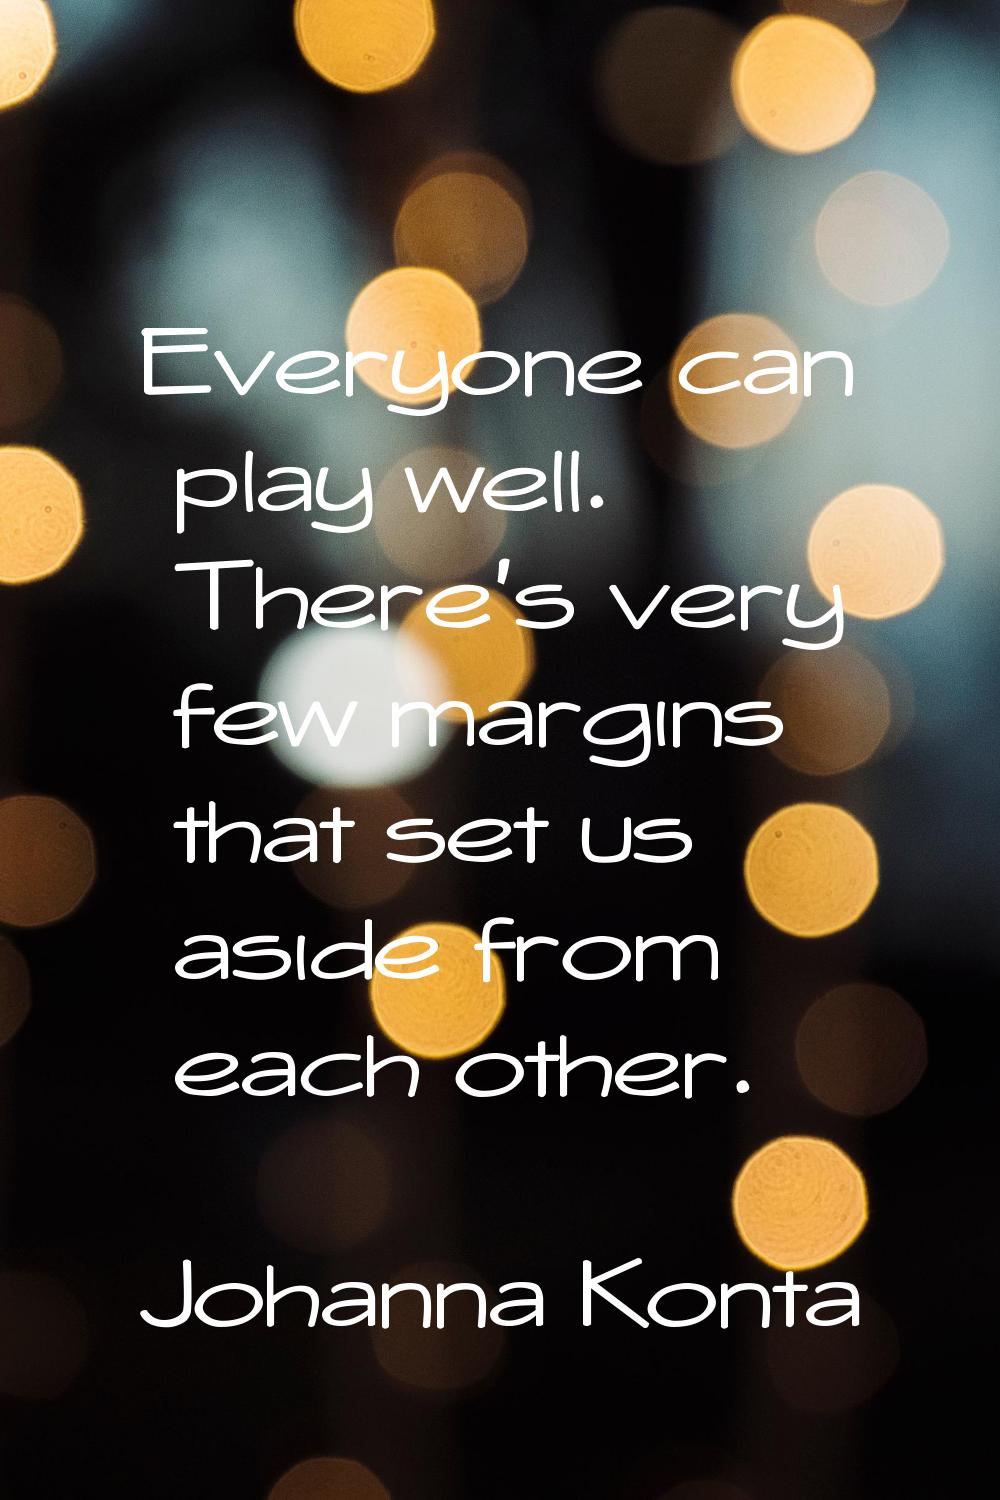 Everyone can play well. There's very few margins that set us aside from each other.